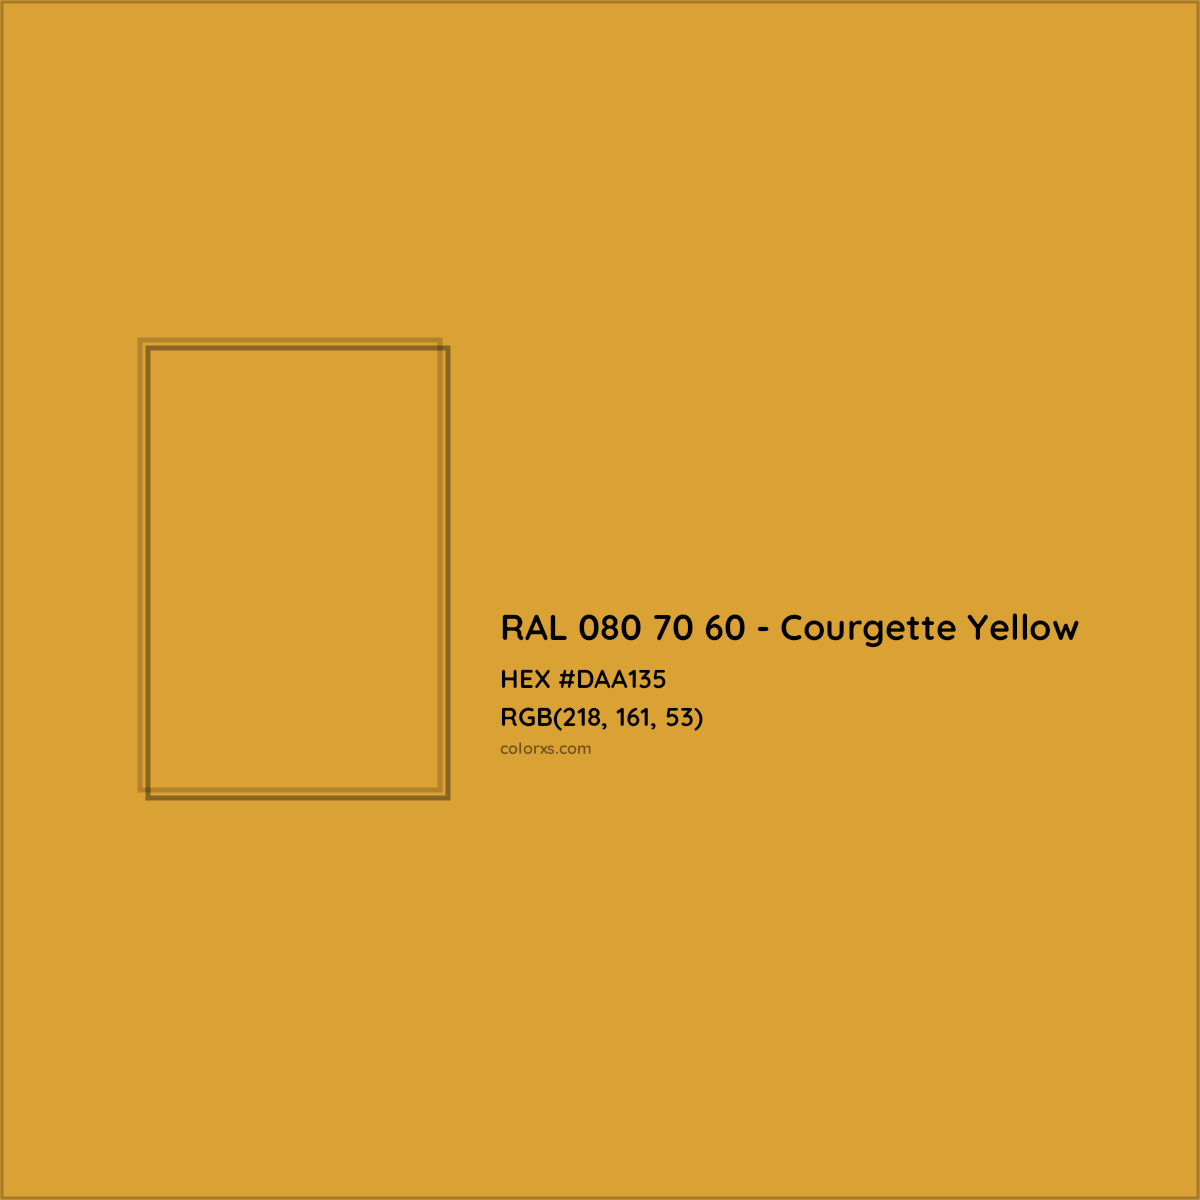 HEX #DAA135 RAL 080 70 60 - Courgette Yellow CMS RAL Design - Color Code